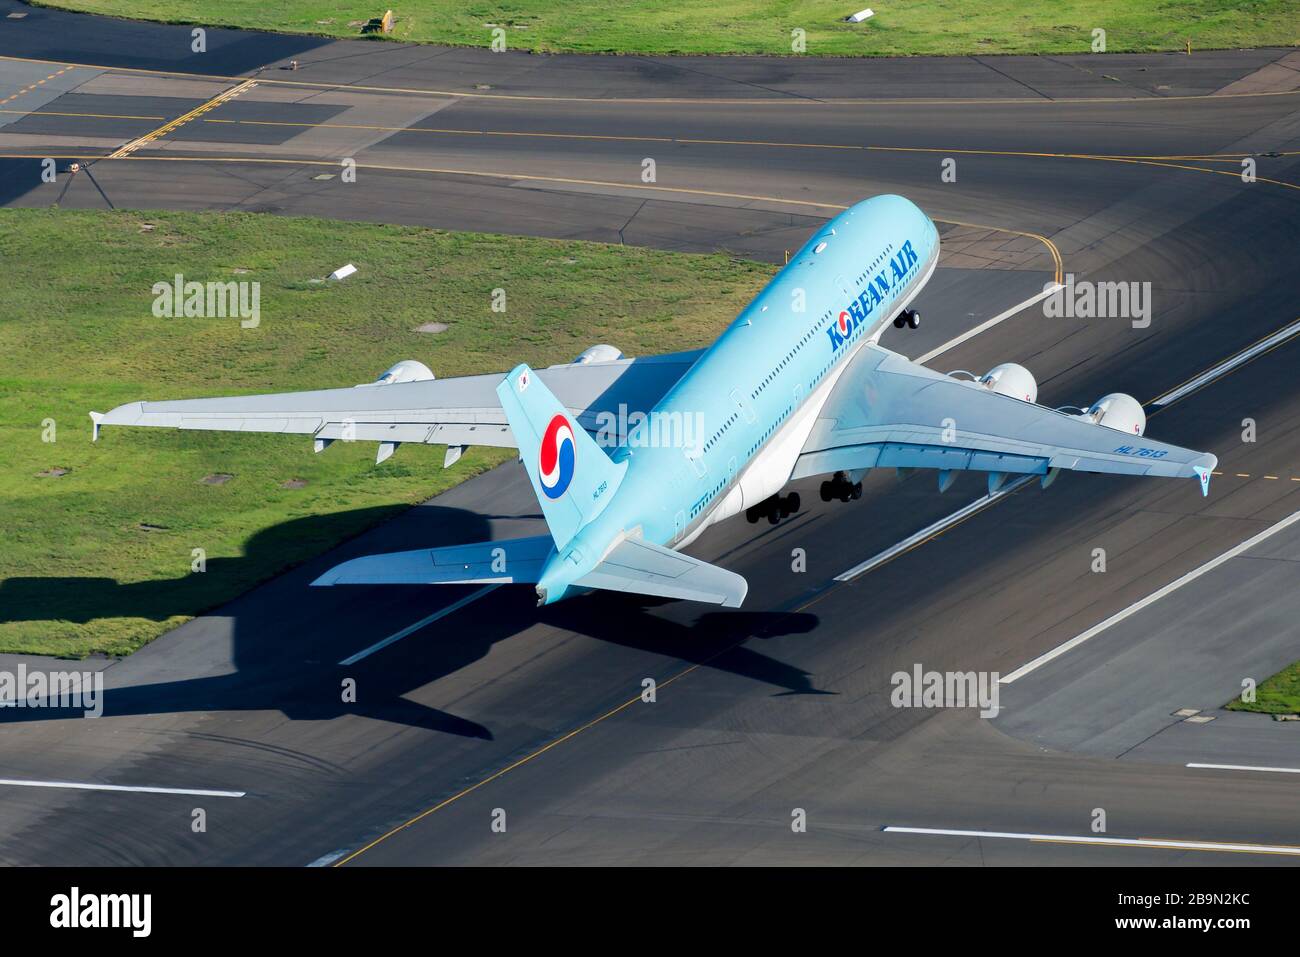 Korean Air Airbus A380 aircraft taking off from Sydney Airport in Australia. A380-800 airplane registered as HL7613. Aerial view of airplane departure Stock Photo